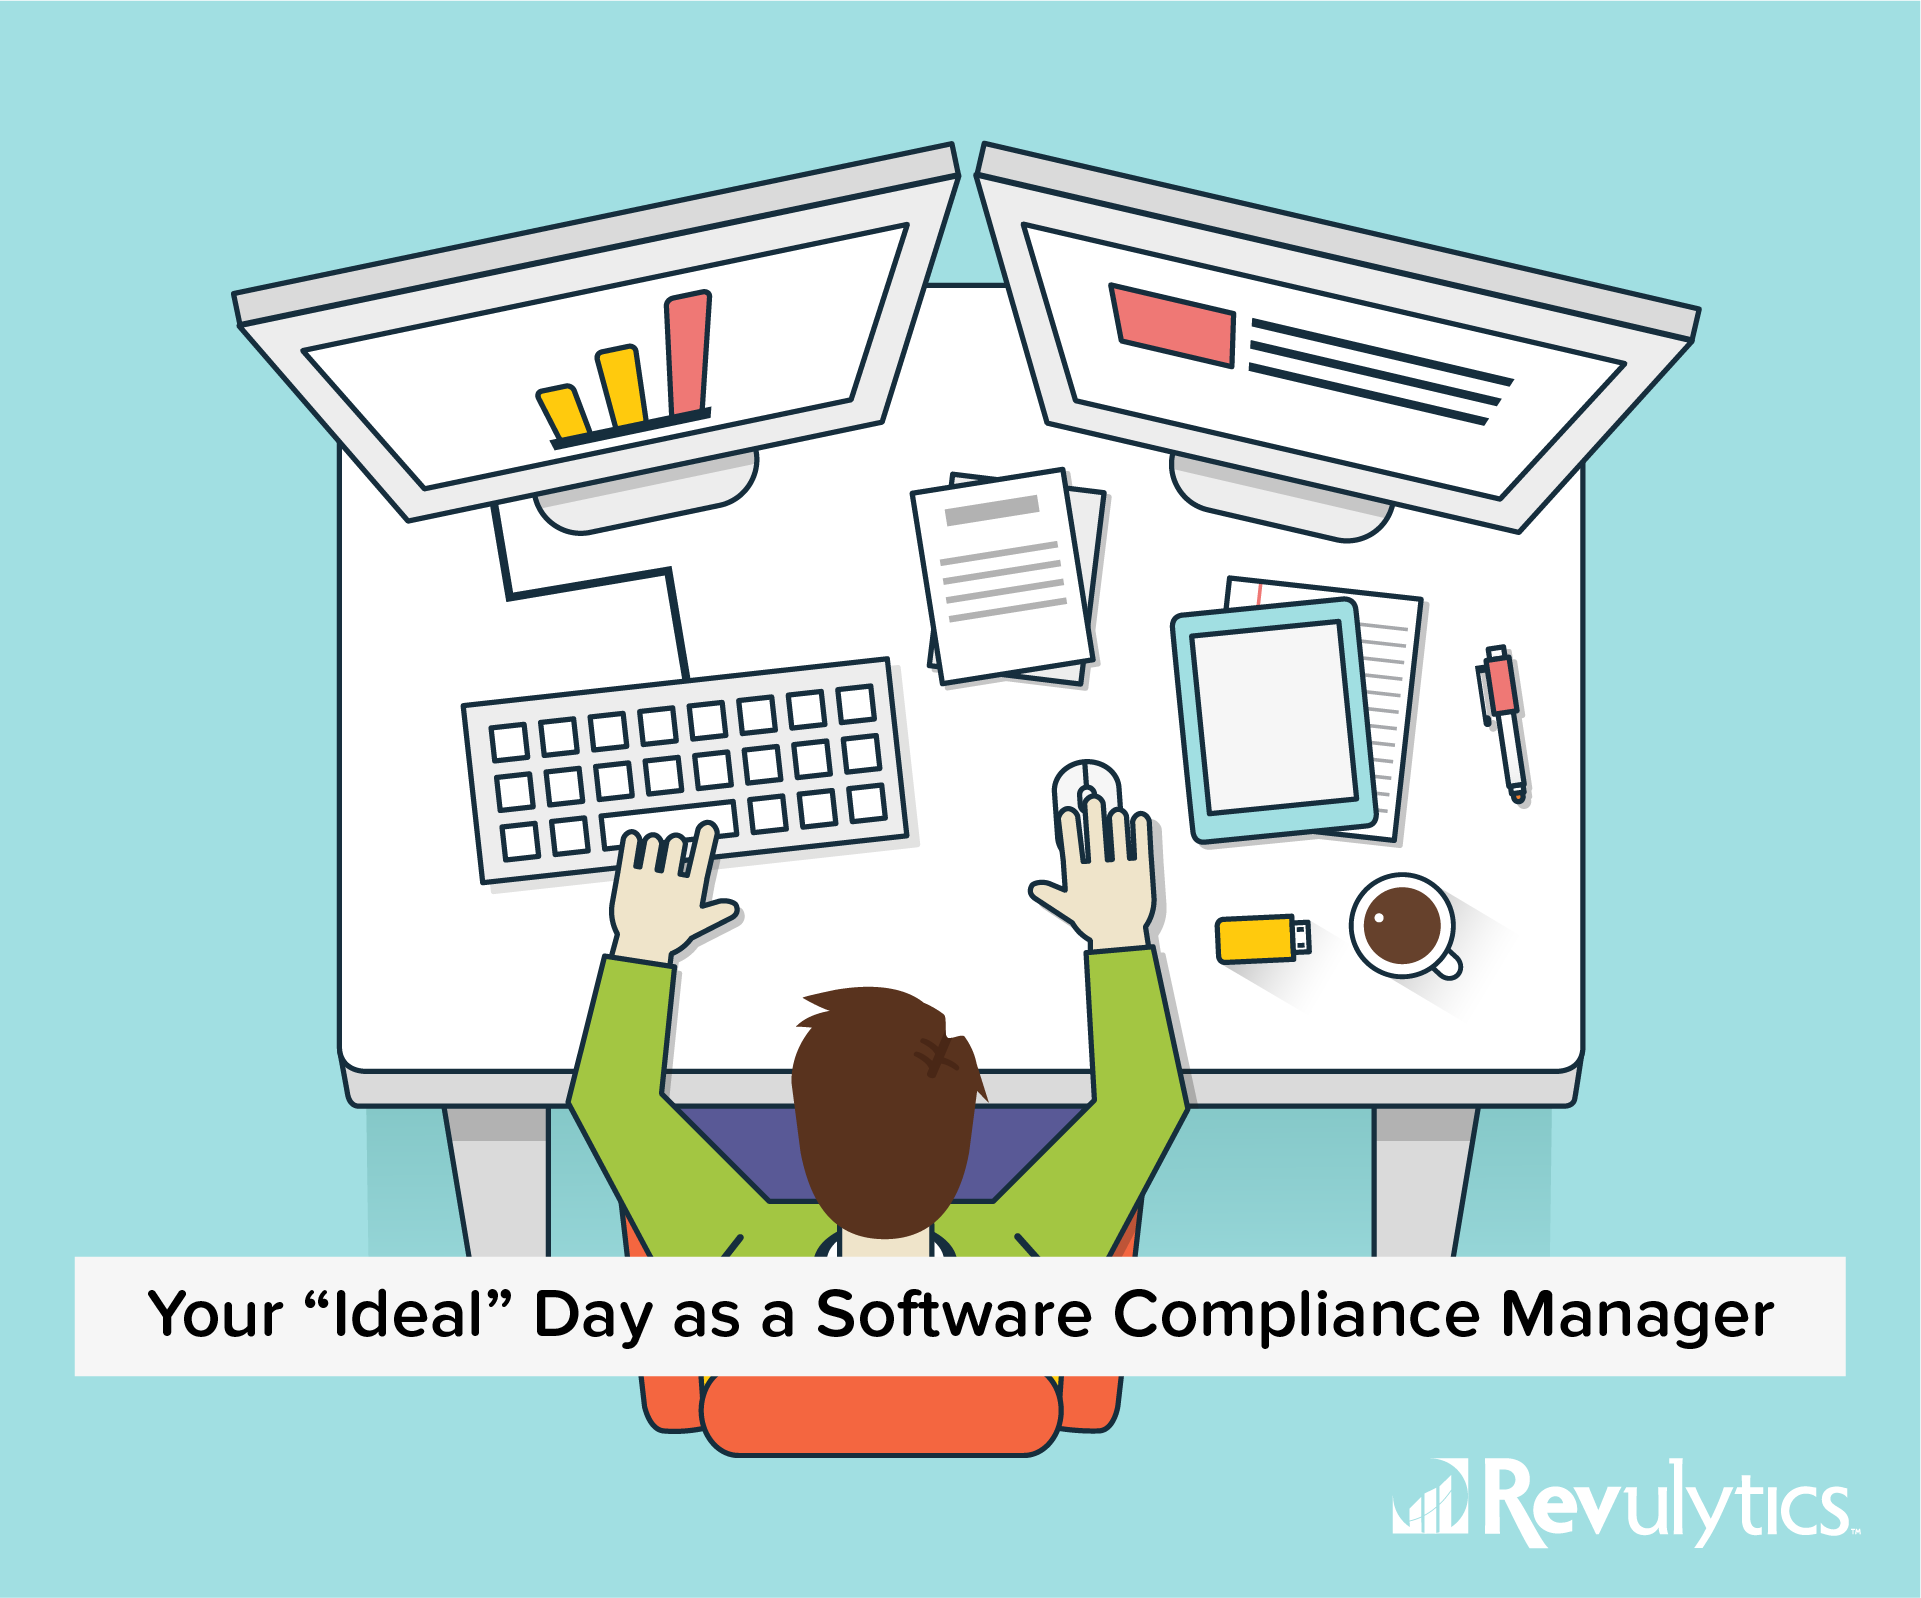 Imagining Your “Ideal” Day as a Software Compliance Manager (Part 2)